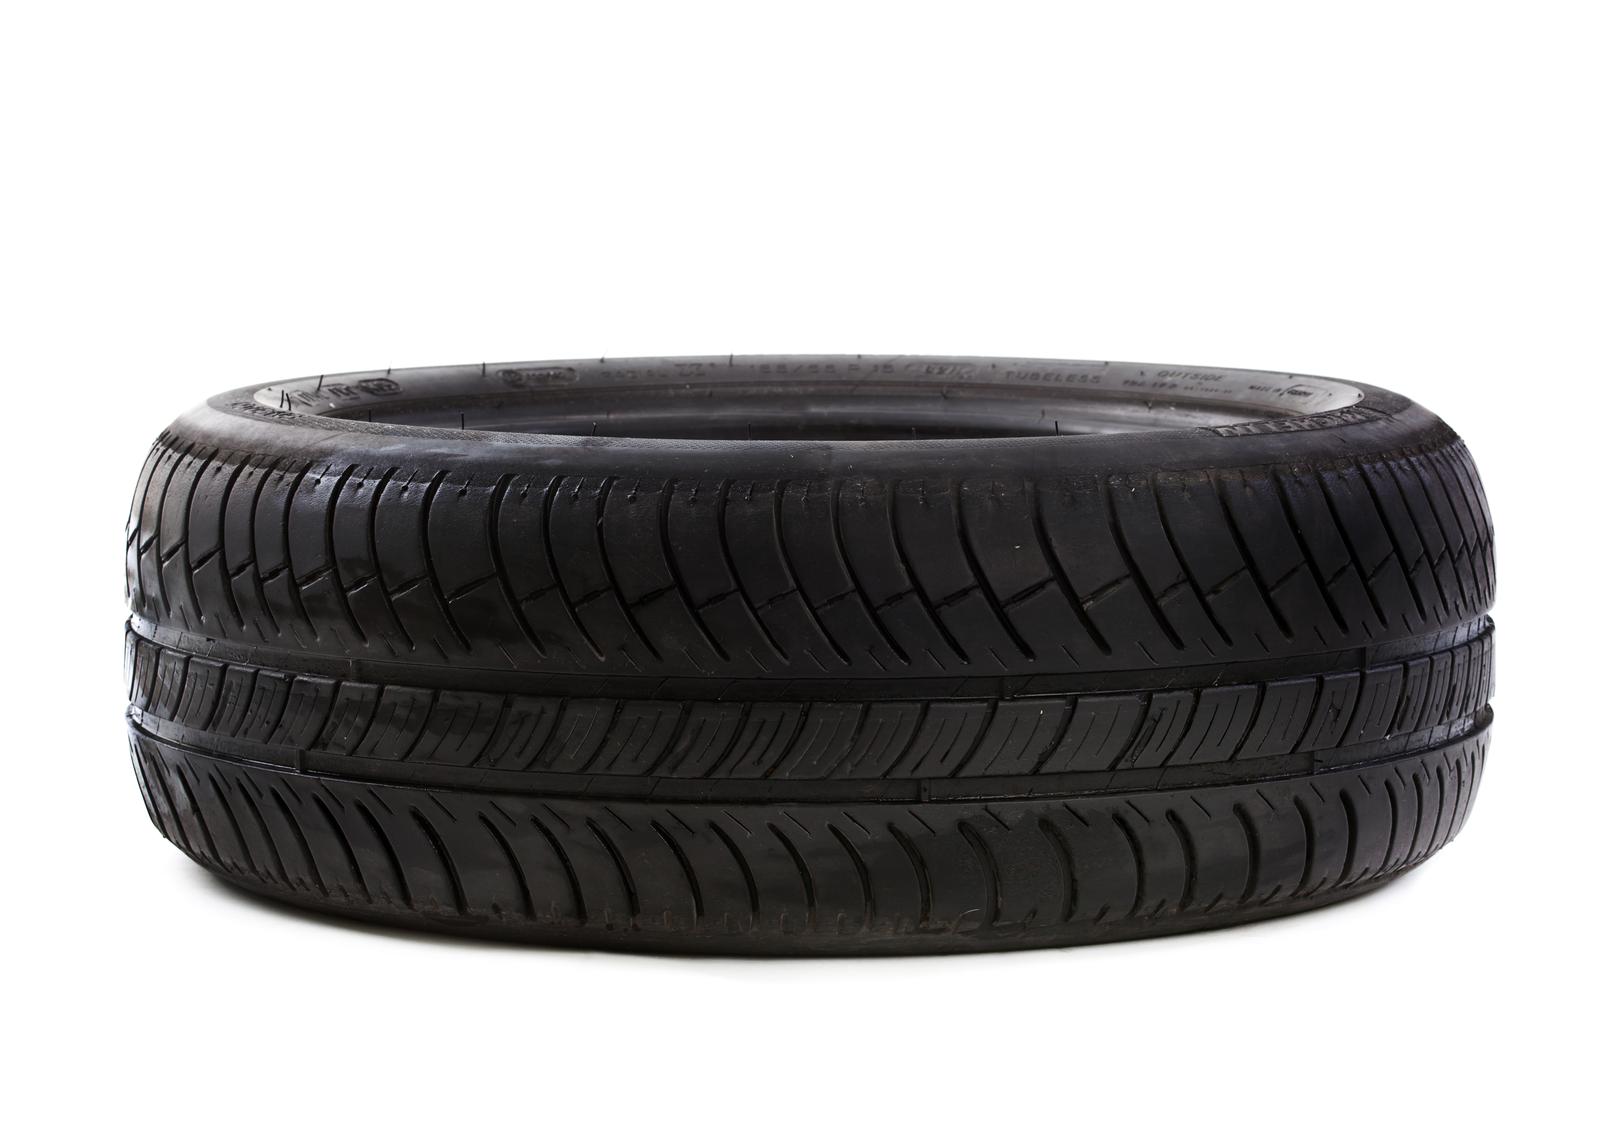 Manufacture of rubber tyres and tubes; retreading and rebuilding of rubber tyres in Tallinn